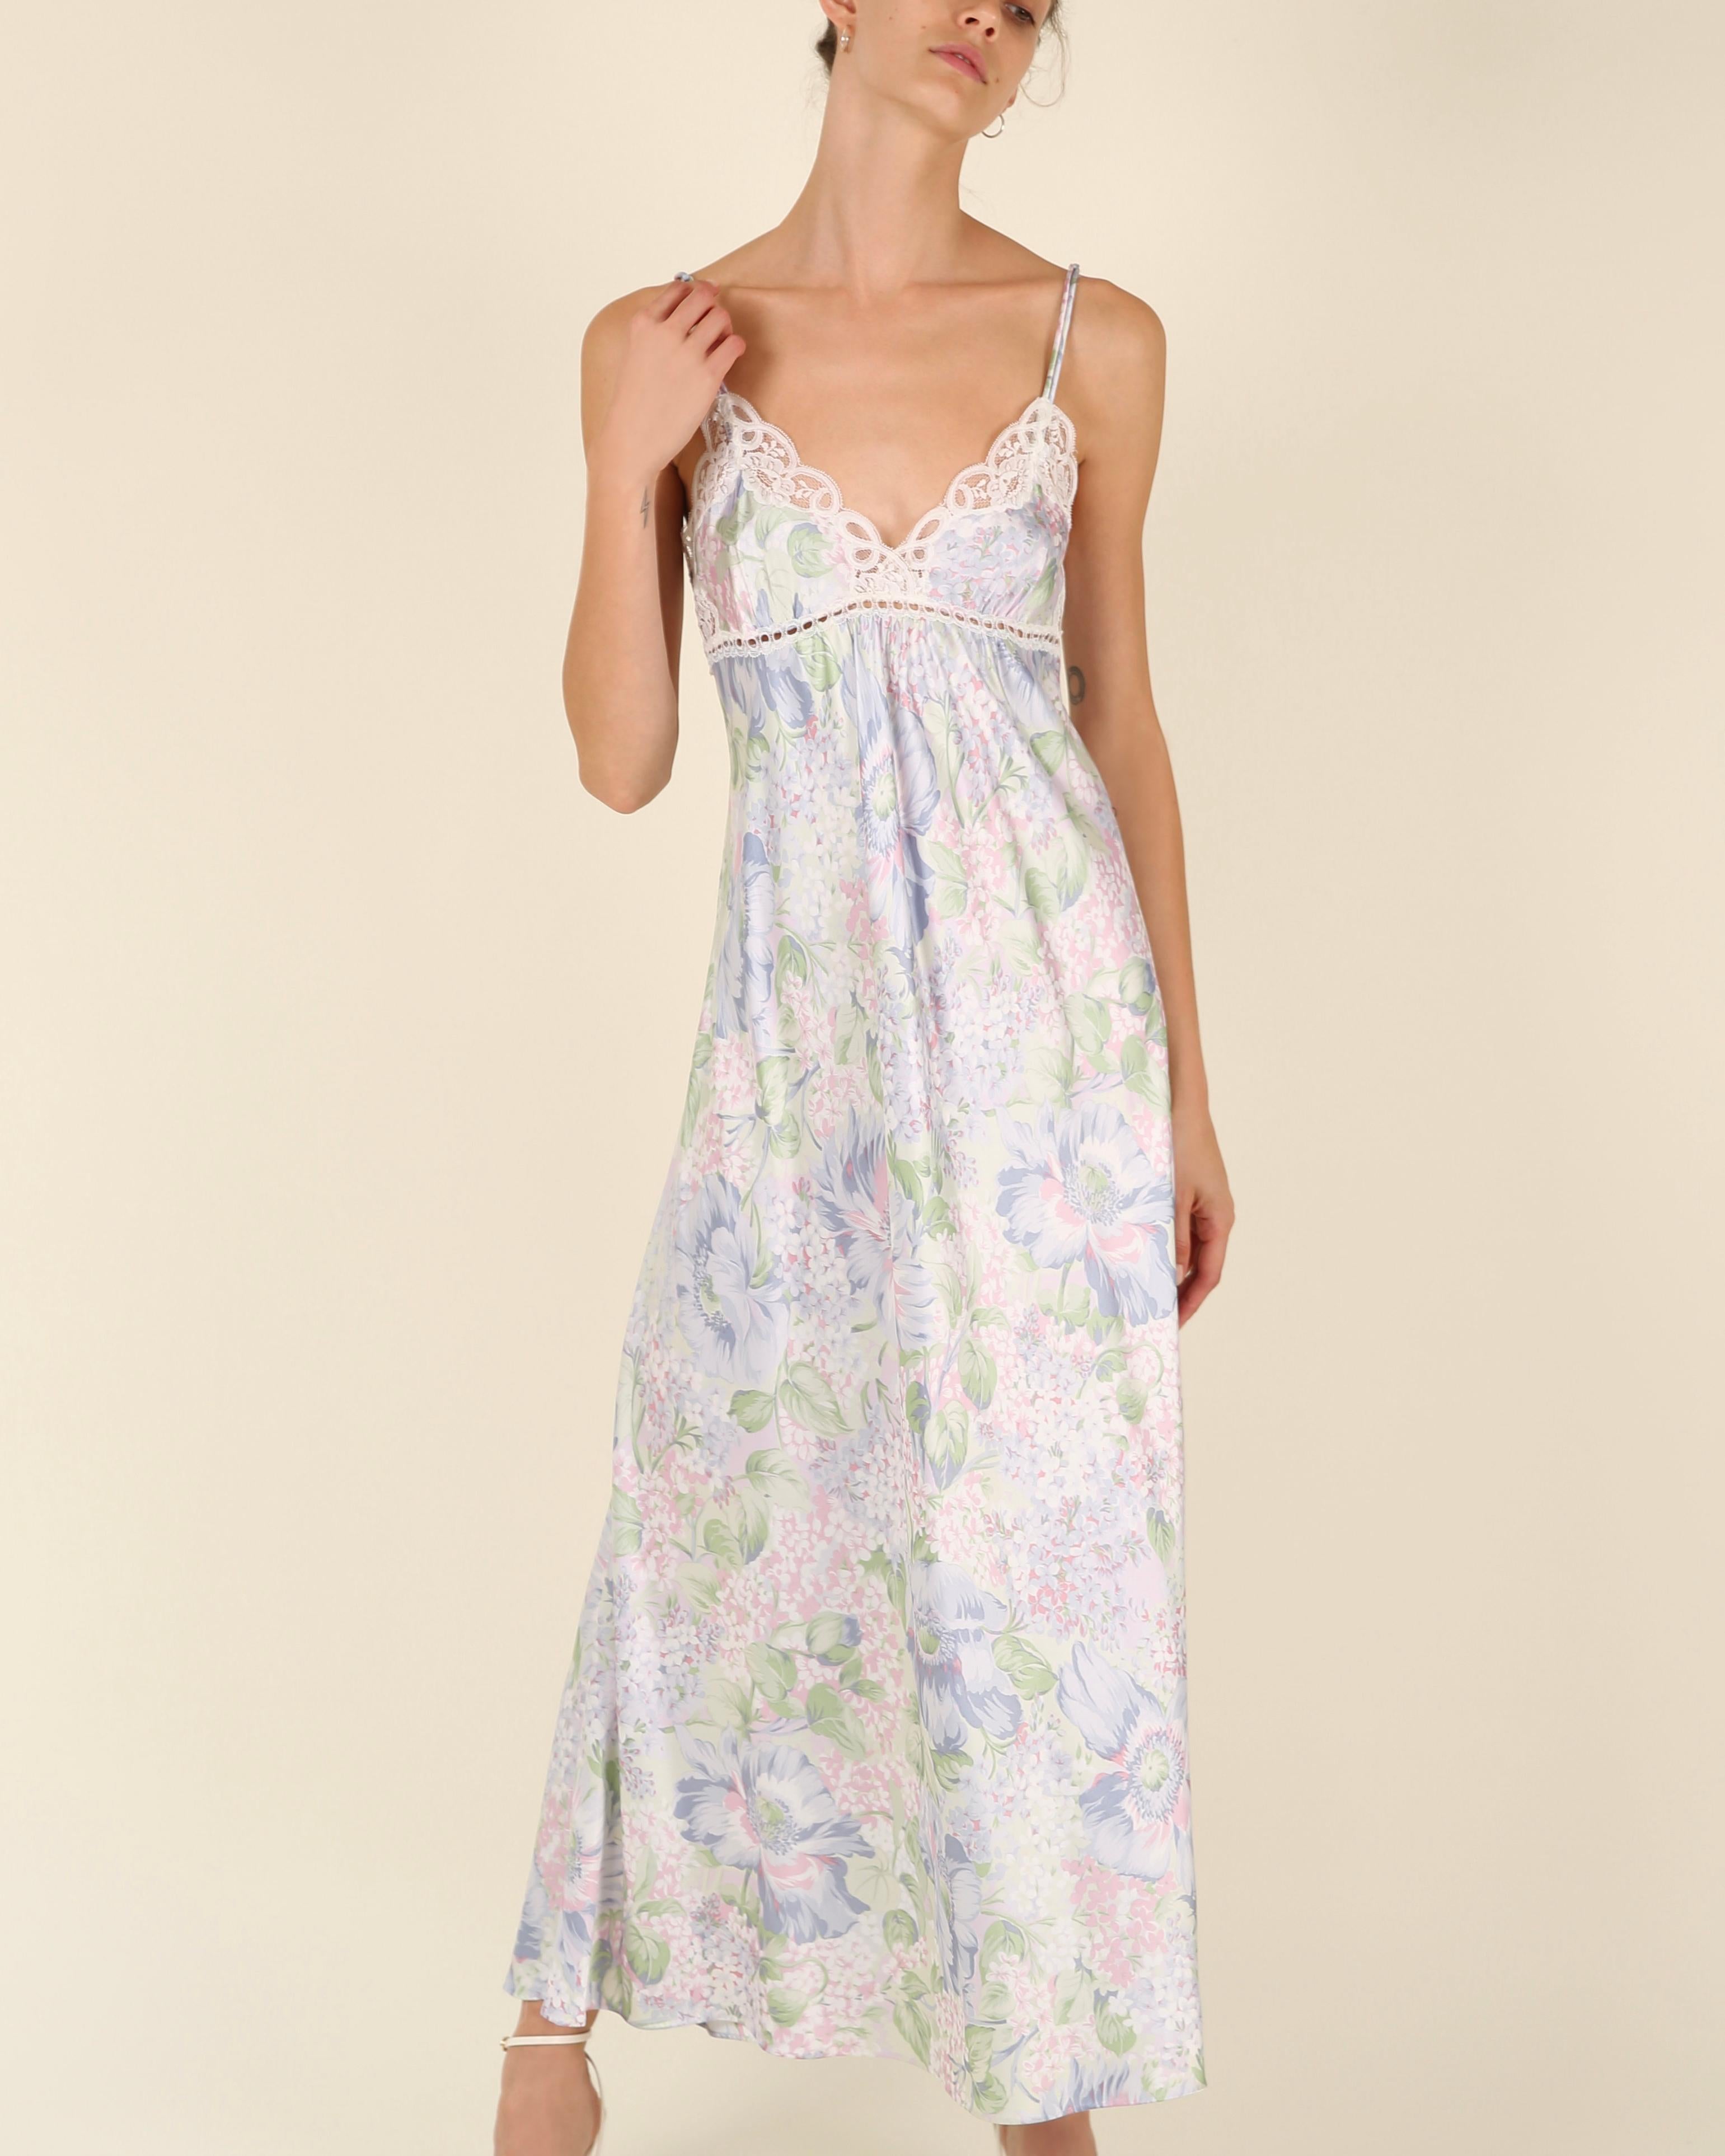 Christian Dior vintage silky lilac floral print lace night gown slip maxi dress For Sale 2